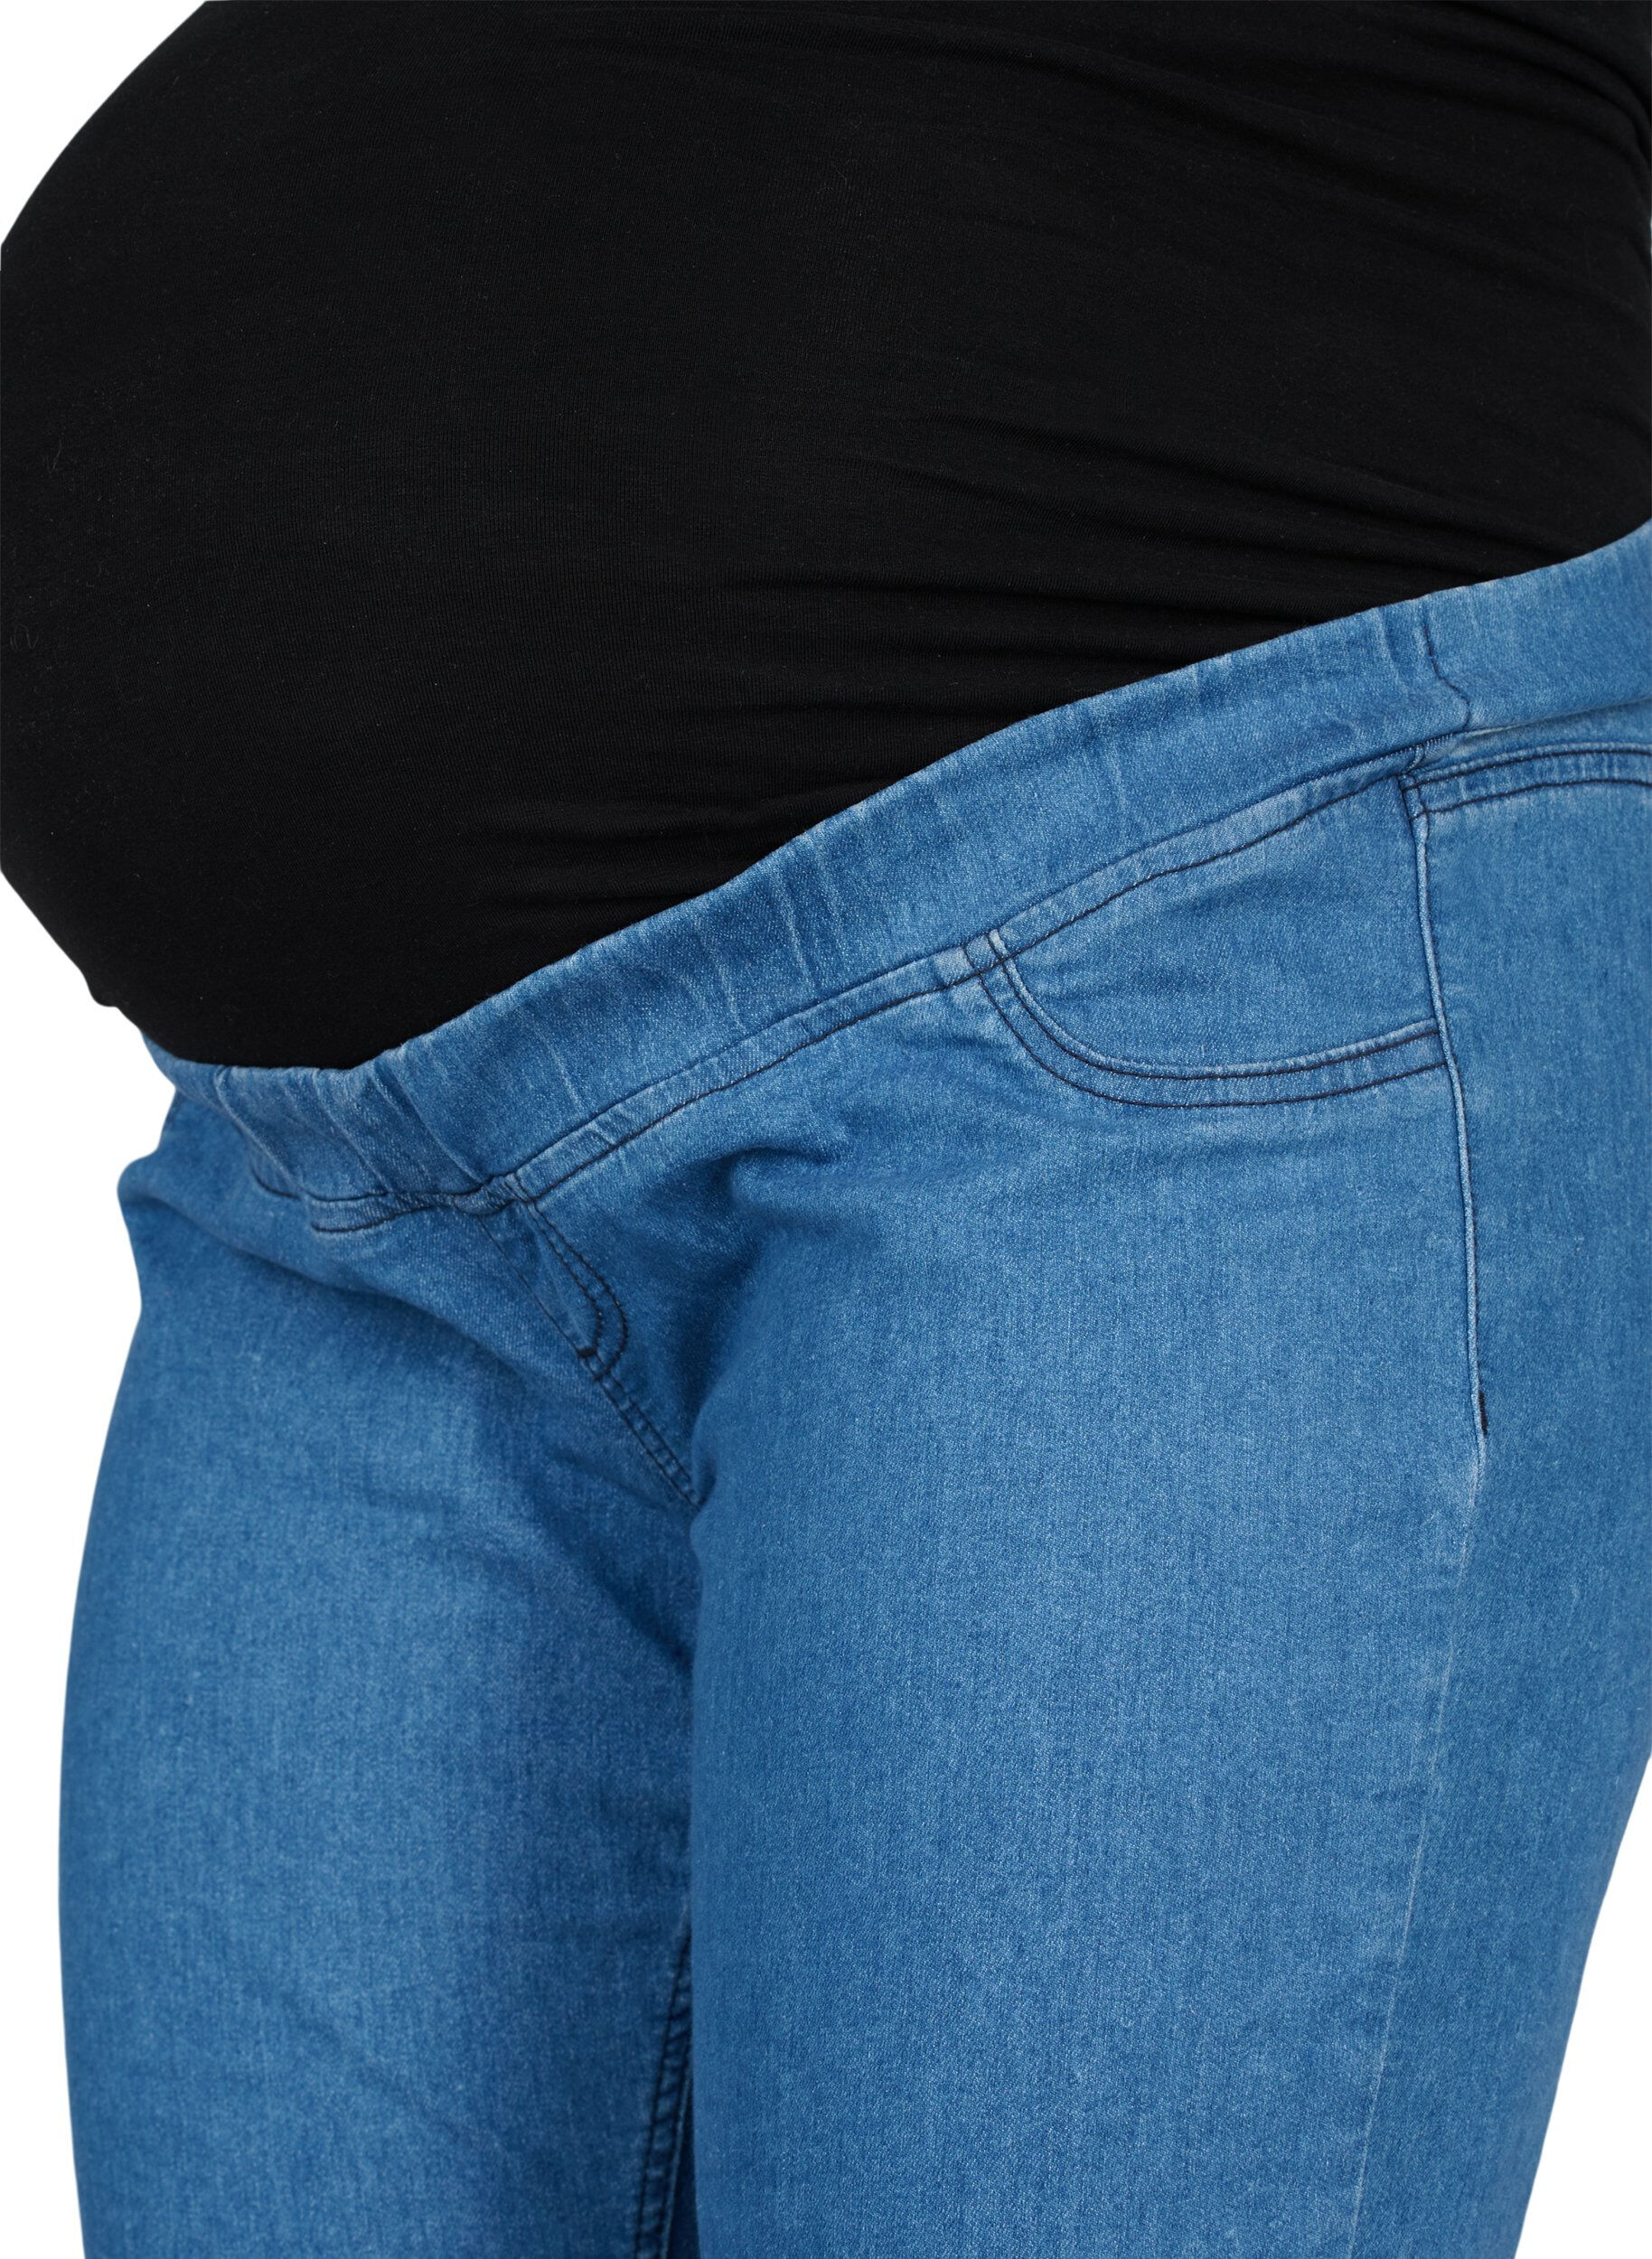 Foucome Women's Maternity Jeans Underbelly India | Ubuy